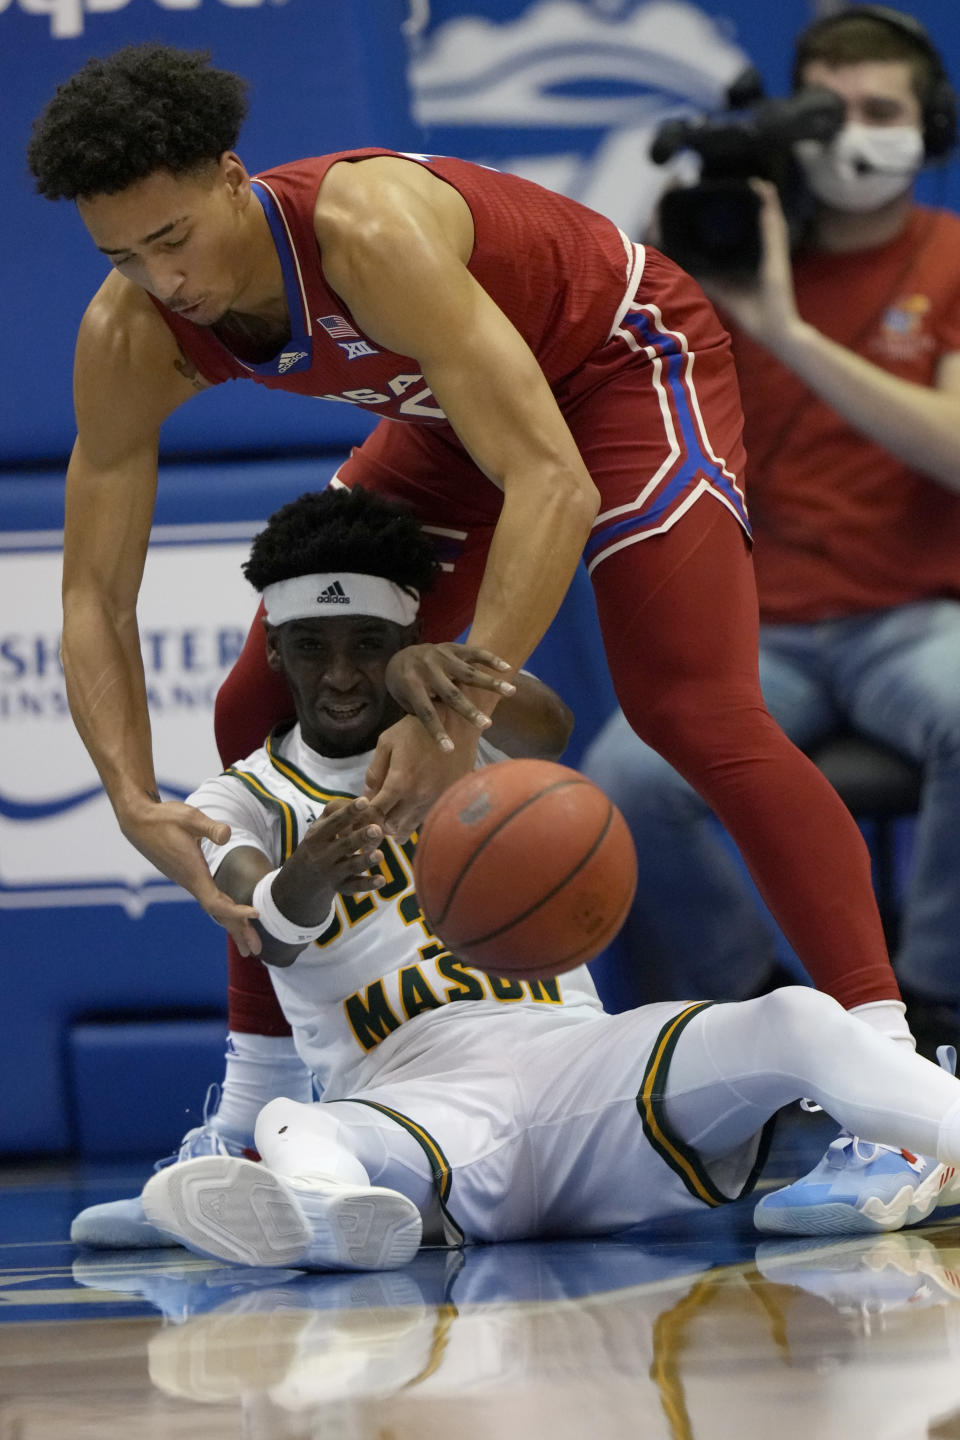 George Mason guard Davonte Gaines (3) passes to a teammate while covered by Kansas forward Jalen Wilson (10) during the first half of an NCAA college basketball game in Lawrence, Kan., Saturday, Jan. 1, 2022. (AP Photo/Orlin Wagner)